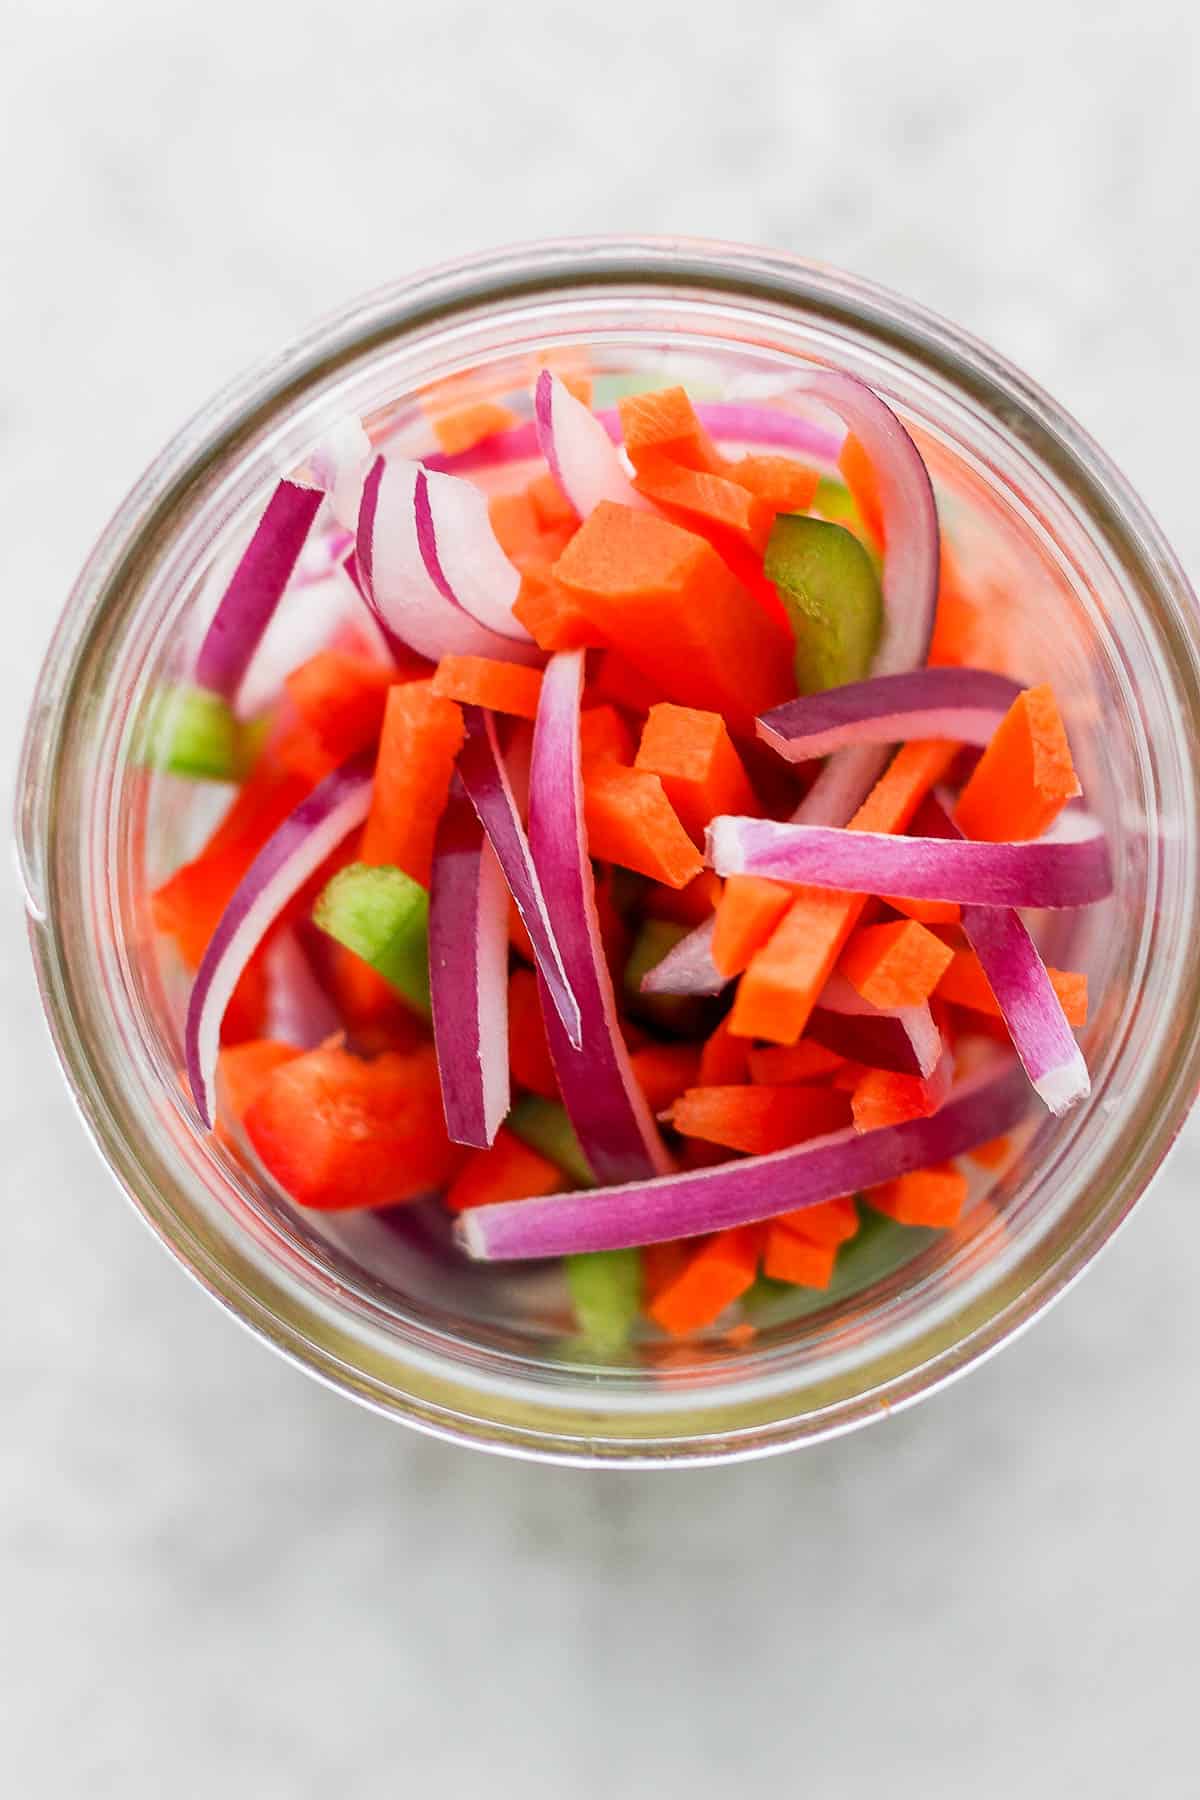 Thinly sliced vegetables in a mason jar.